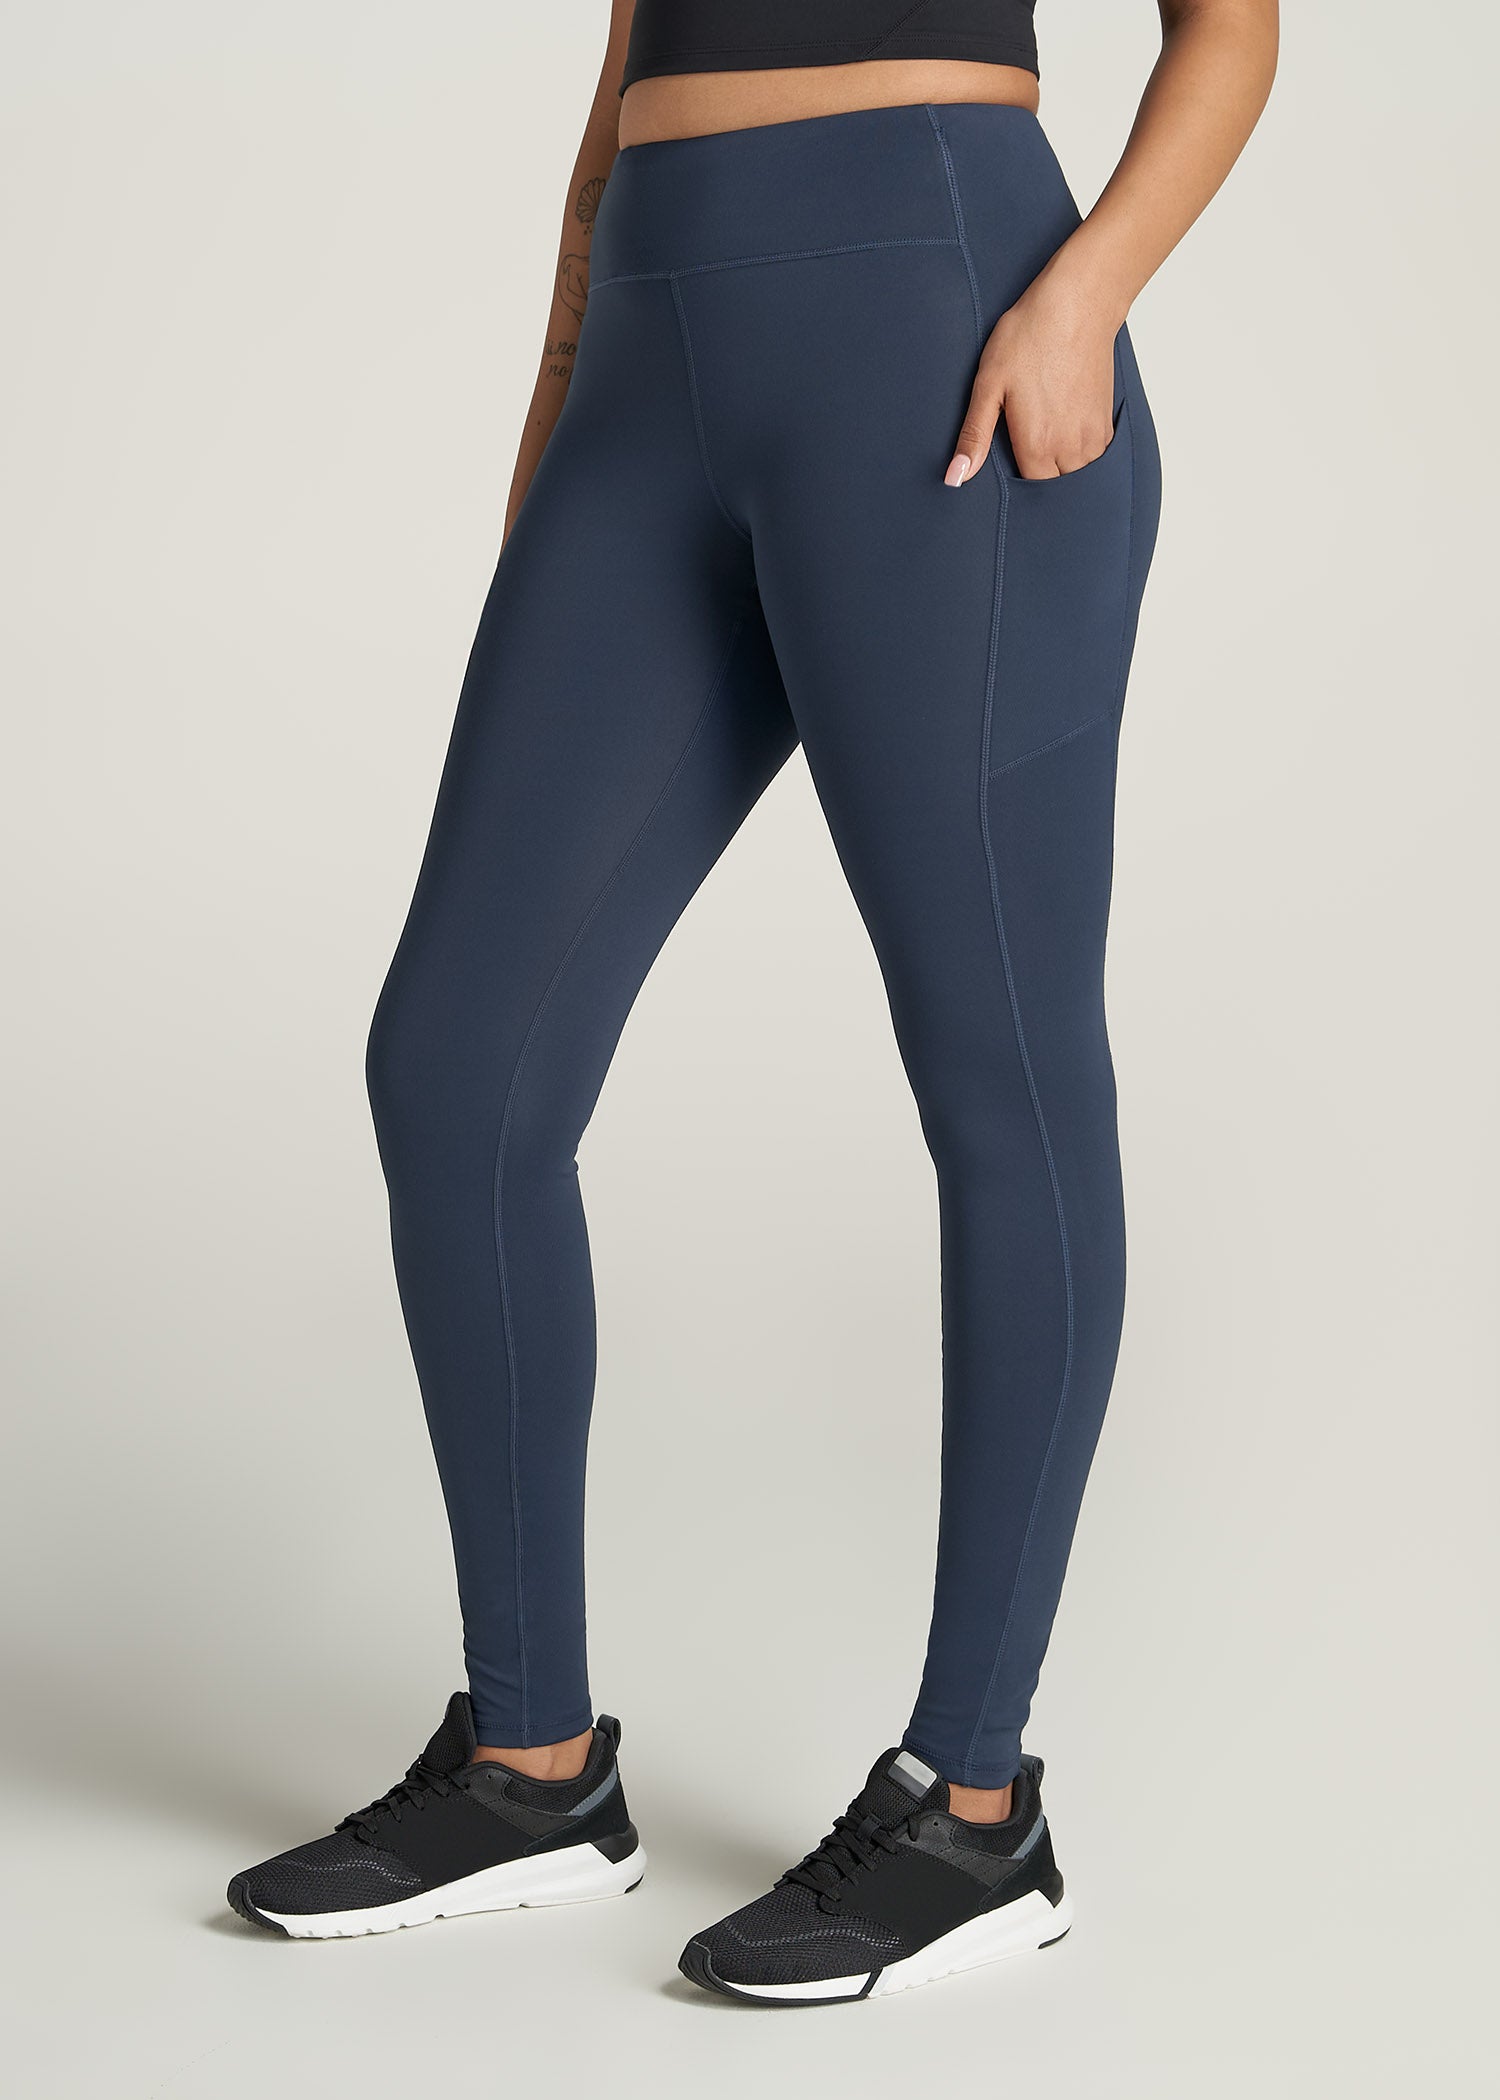 Lululemon speeds  Fitness wear outfits, Womens workout outfits, Workout  attire